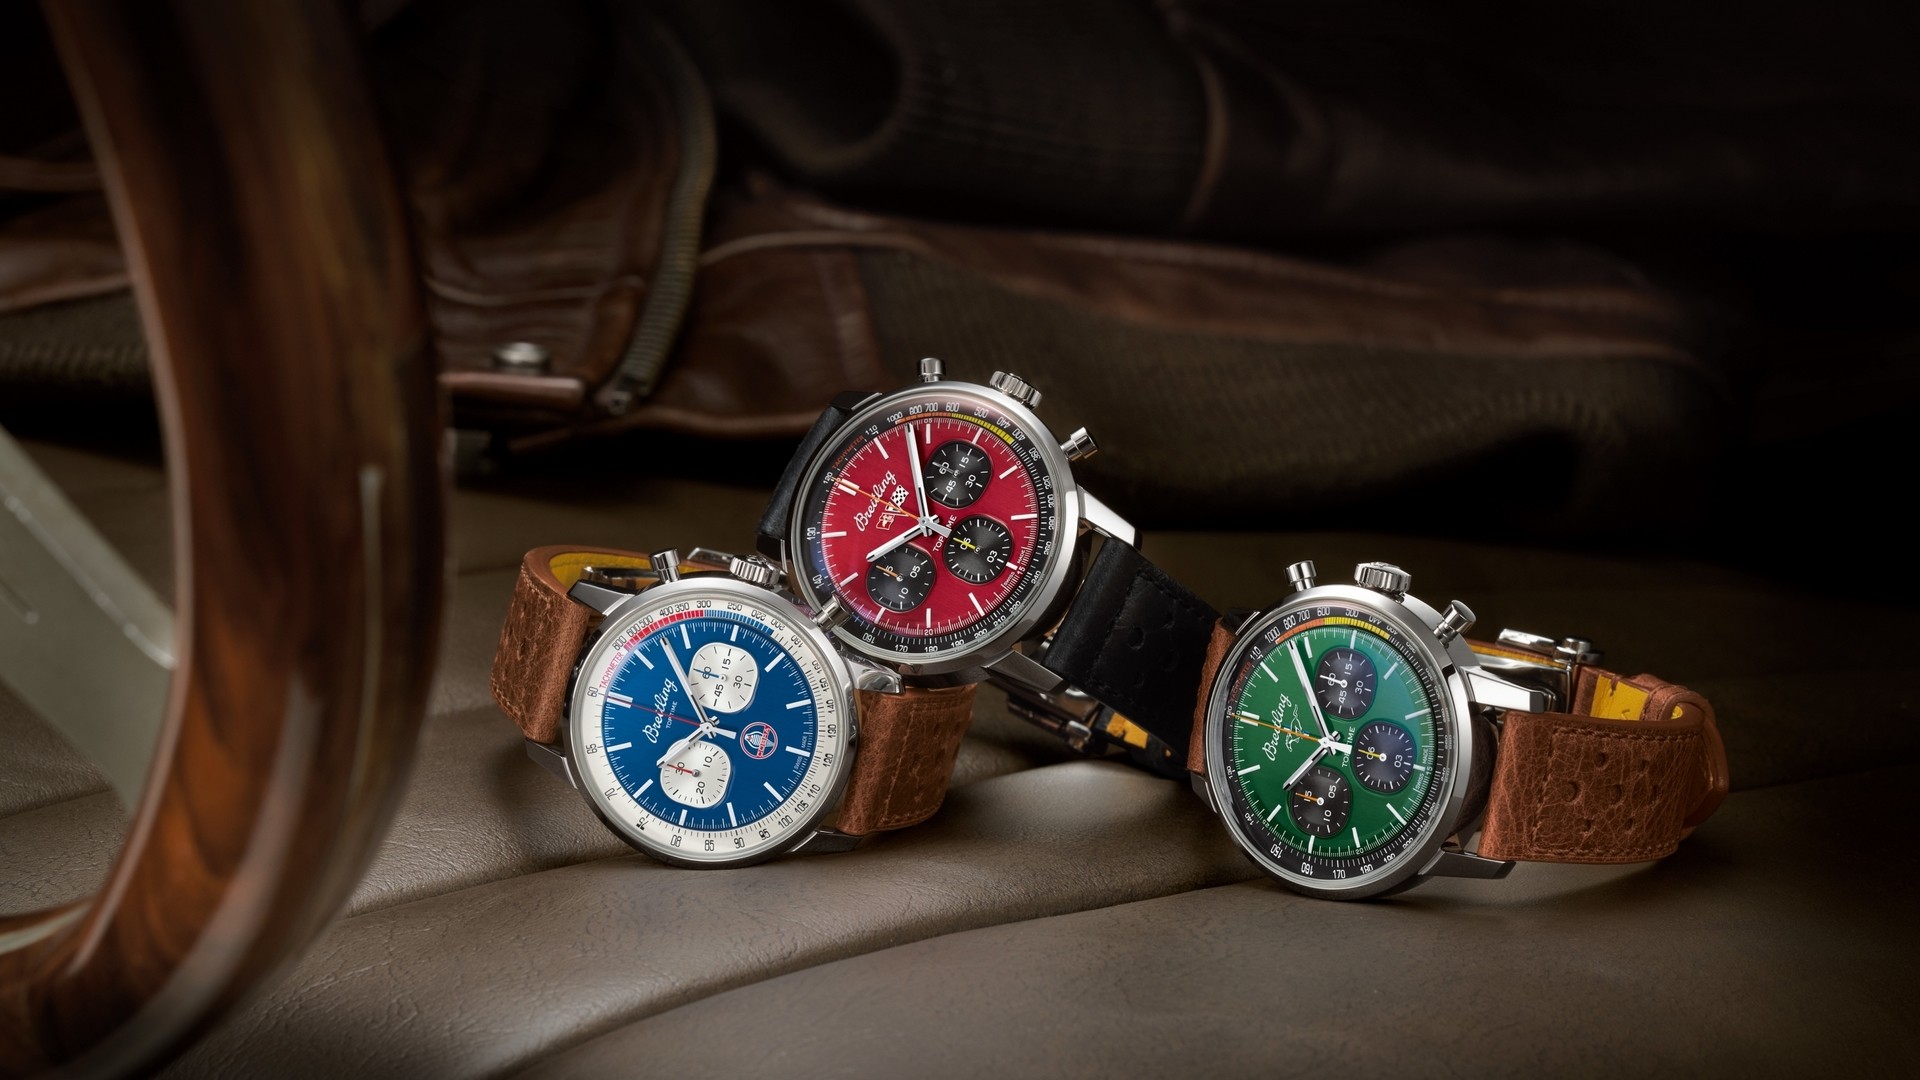 https://static.breitling.cn/media/wysiwyg/news/21-8-31/01_breitling-top-time-classic-cars-capsule-collection_rgb.jpg